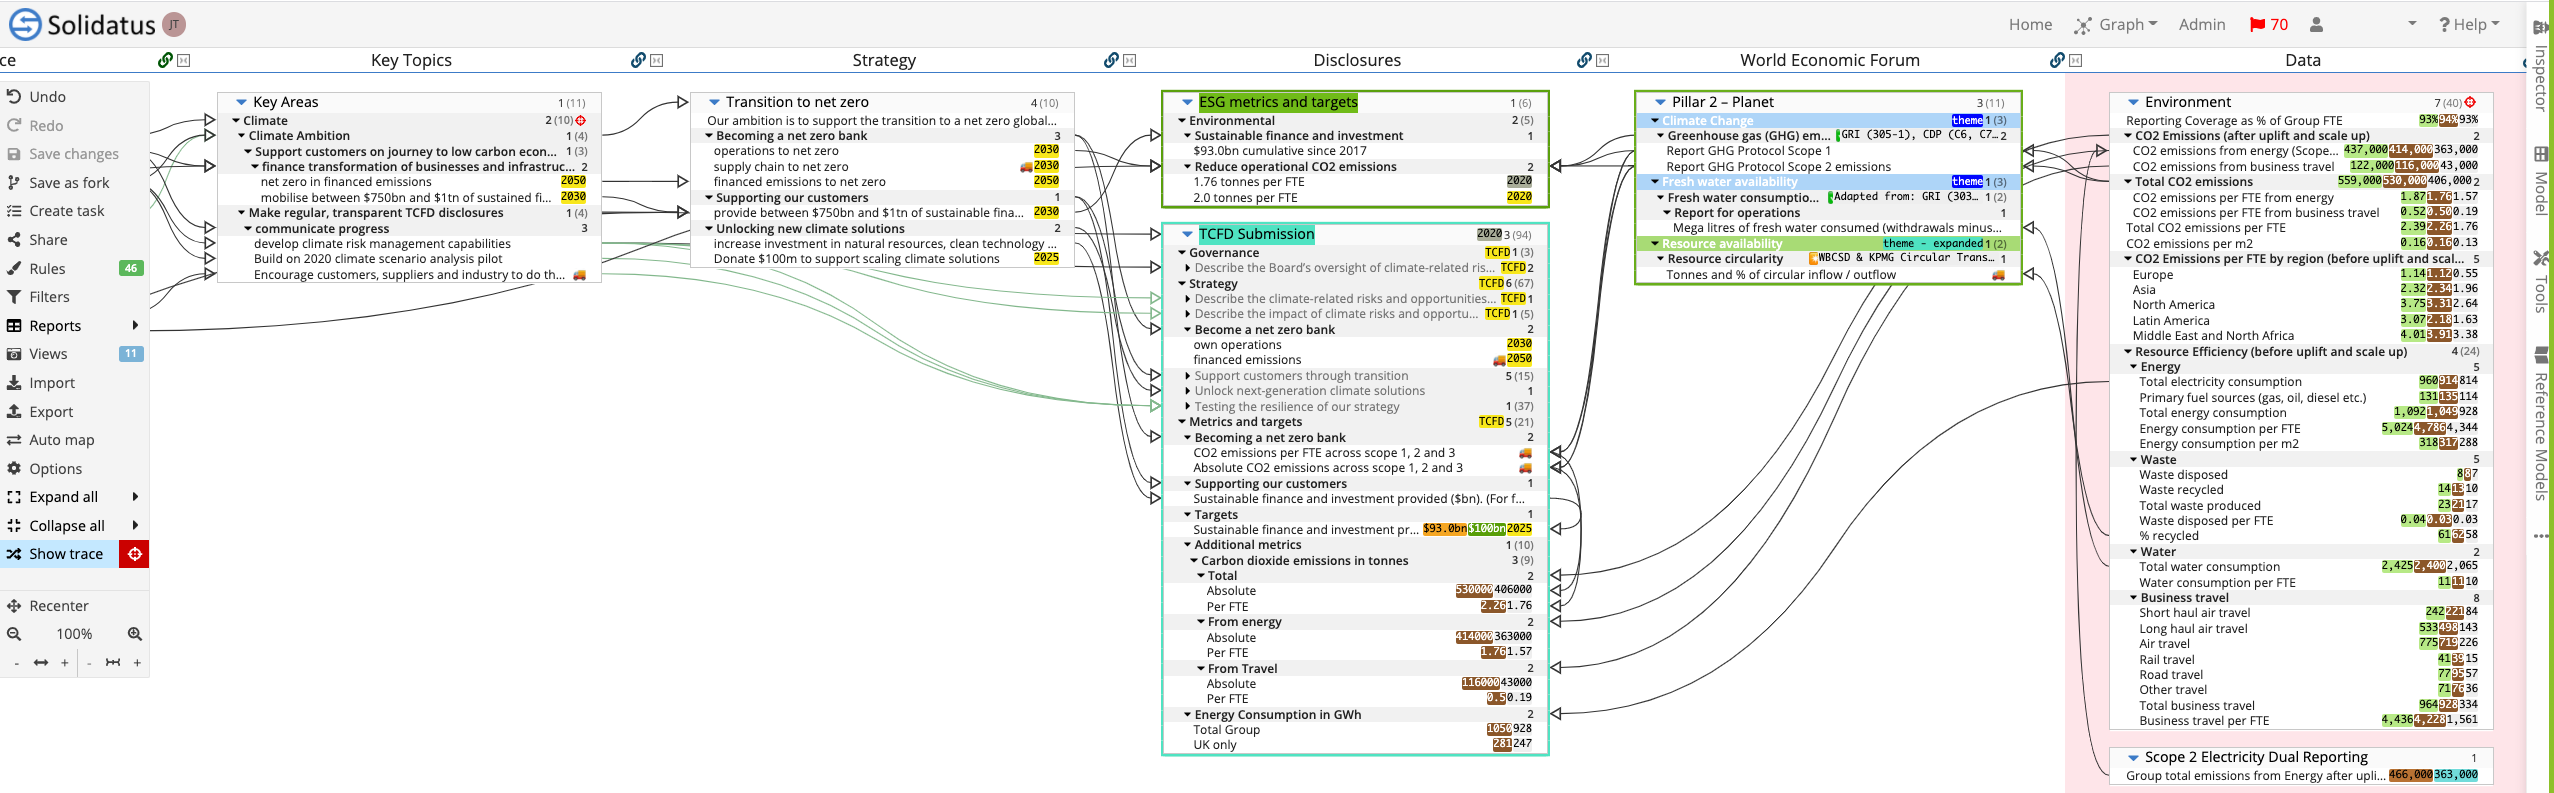 Model: Visualizing an organization’s key topics through to disclosures and data